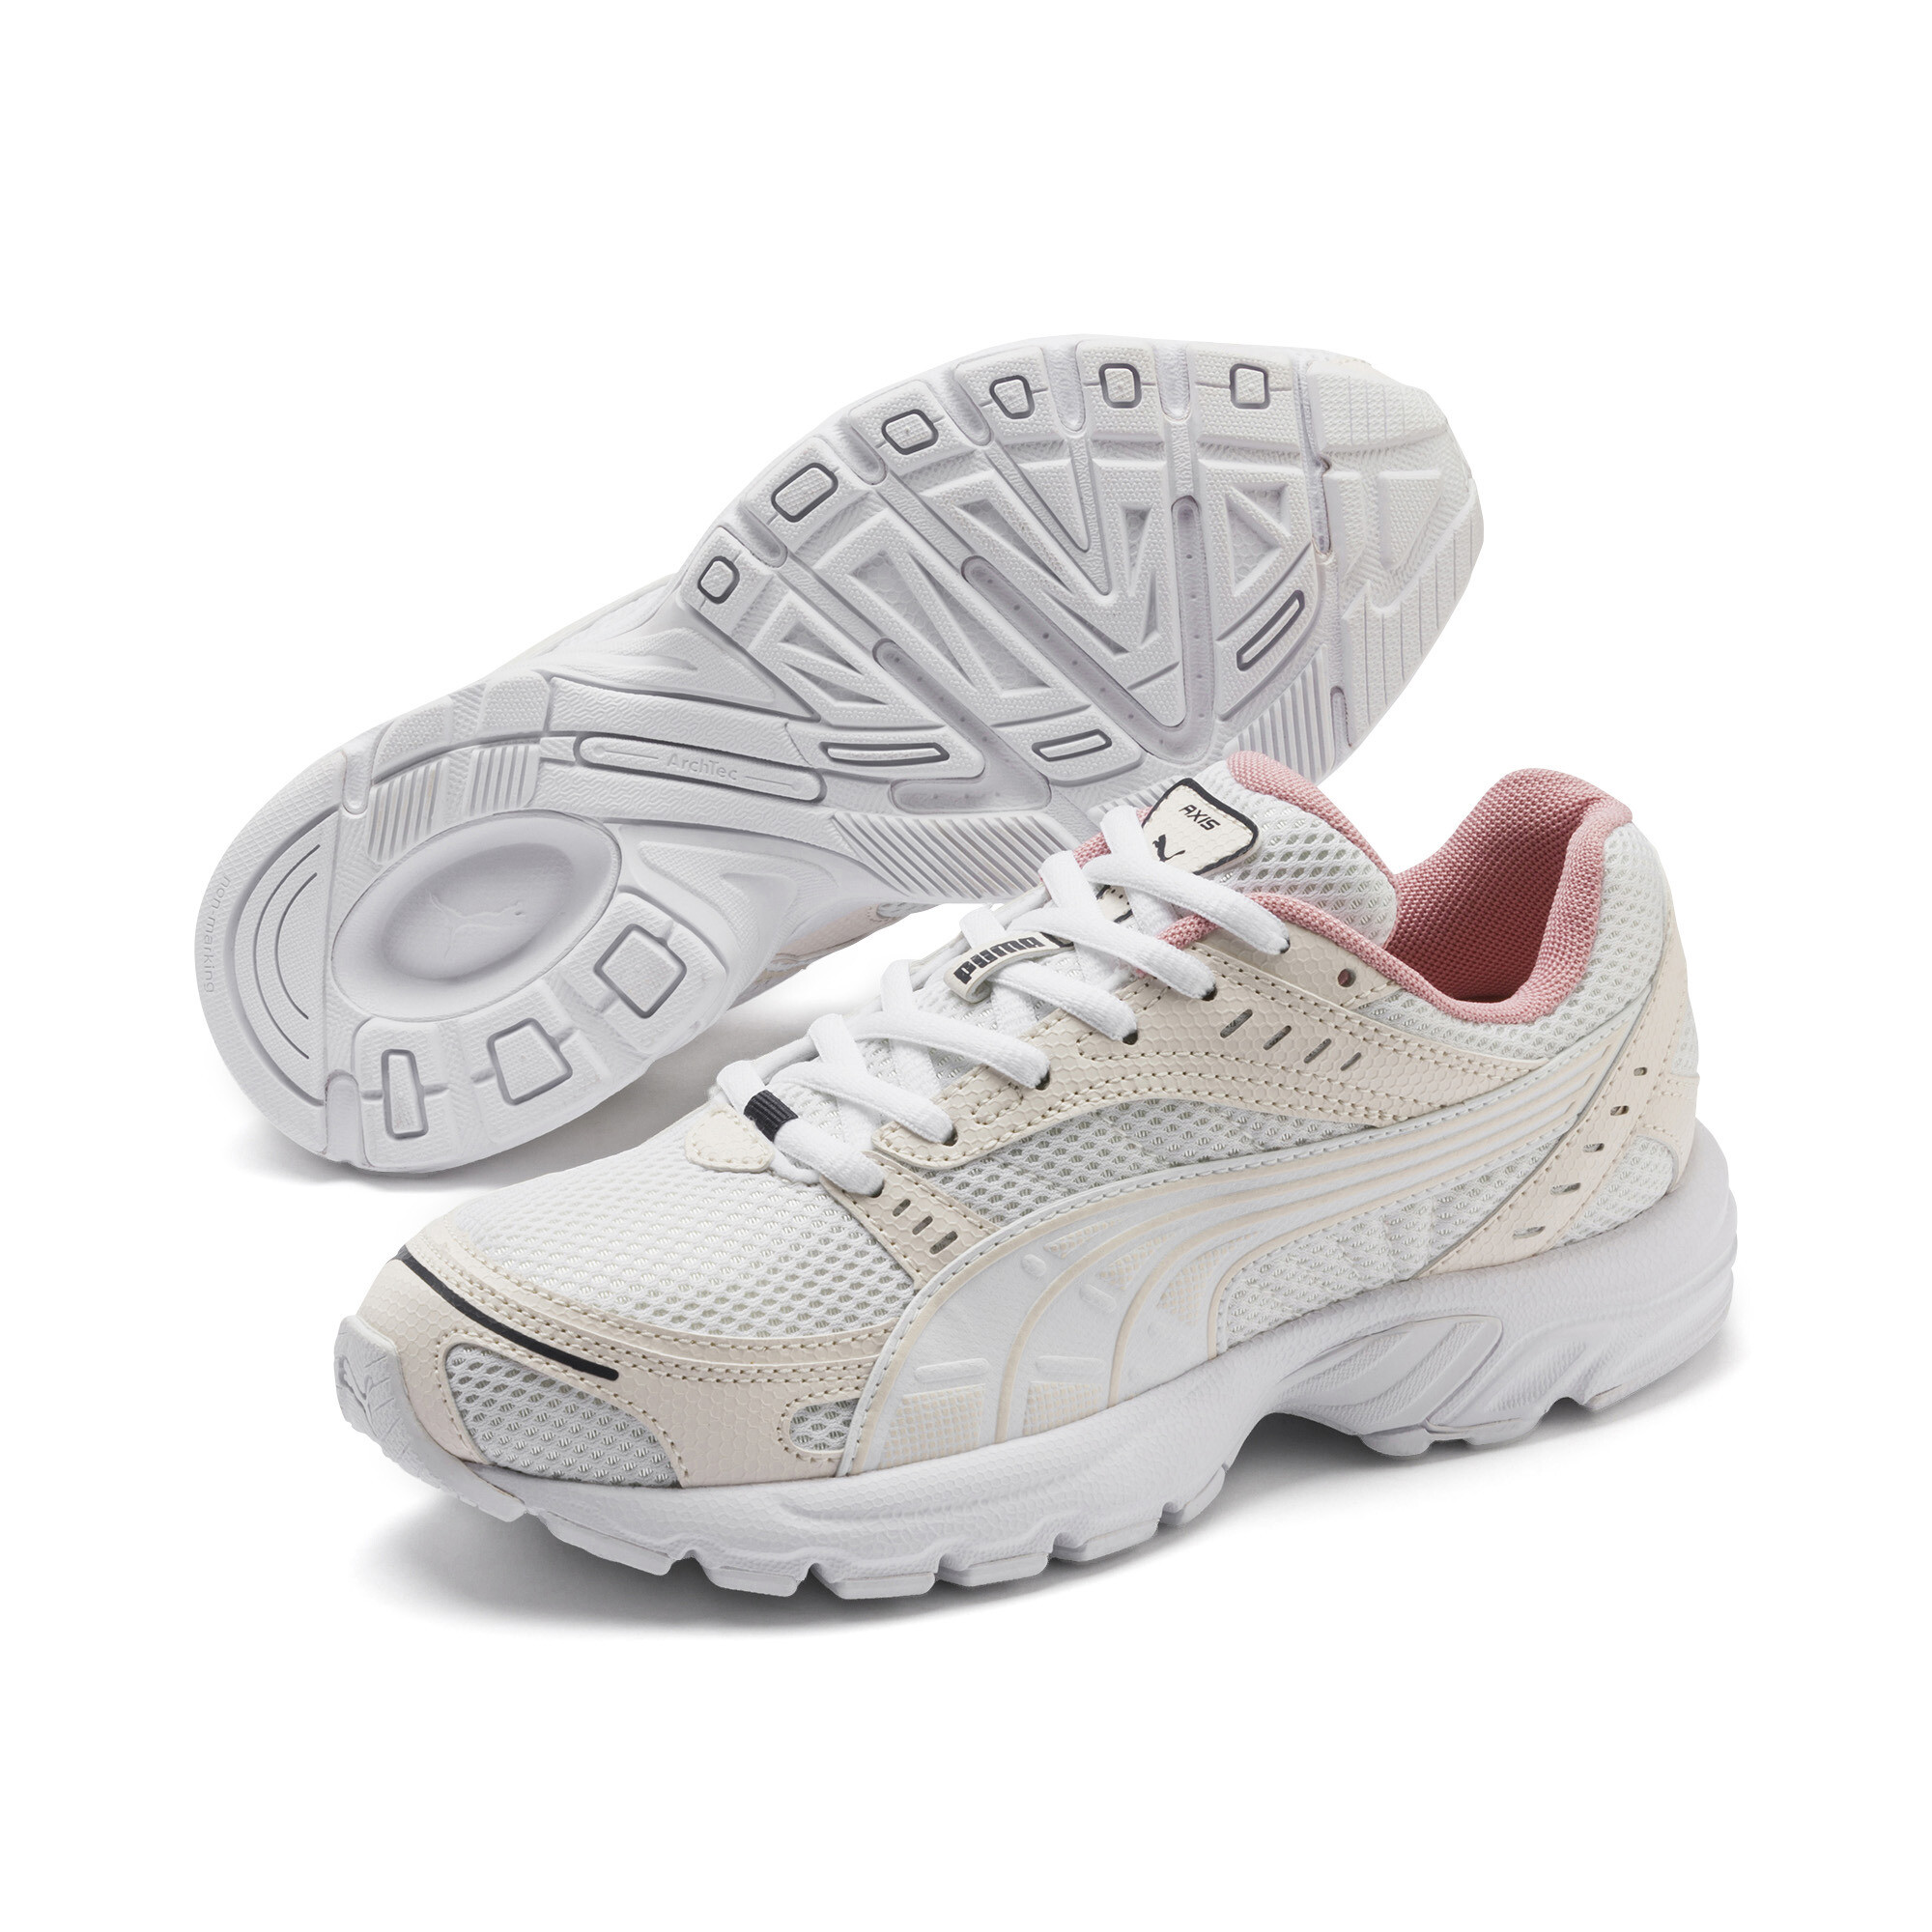 Puma Axis Trainers, White, Size 44, Shoes